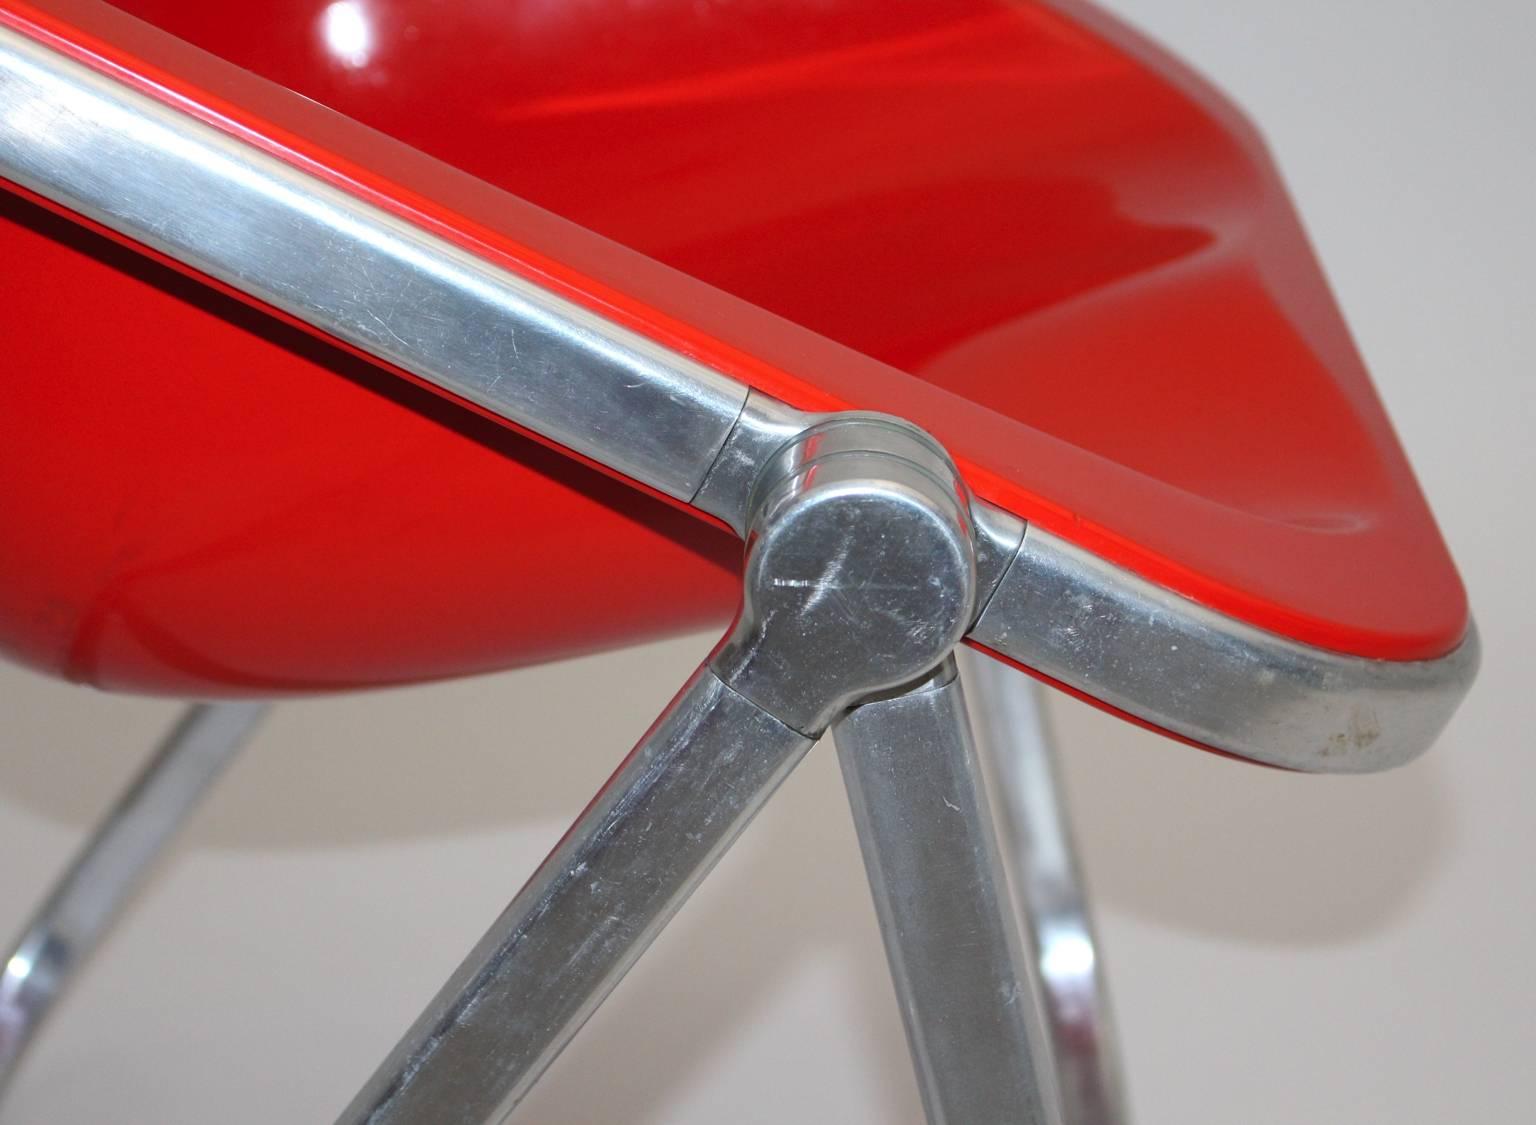 Chrome Giancarlo Piretti Space Age Red Plastic Vintage Armchair Plona 1969, Italy For Sale